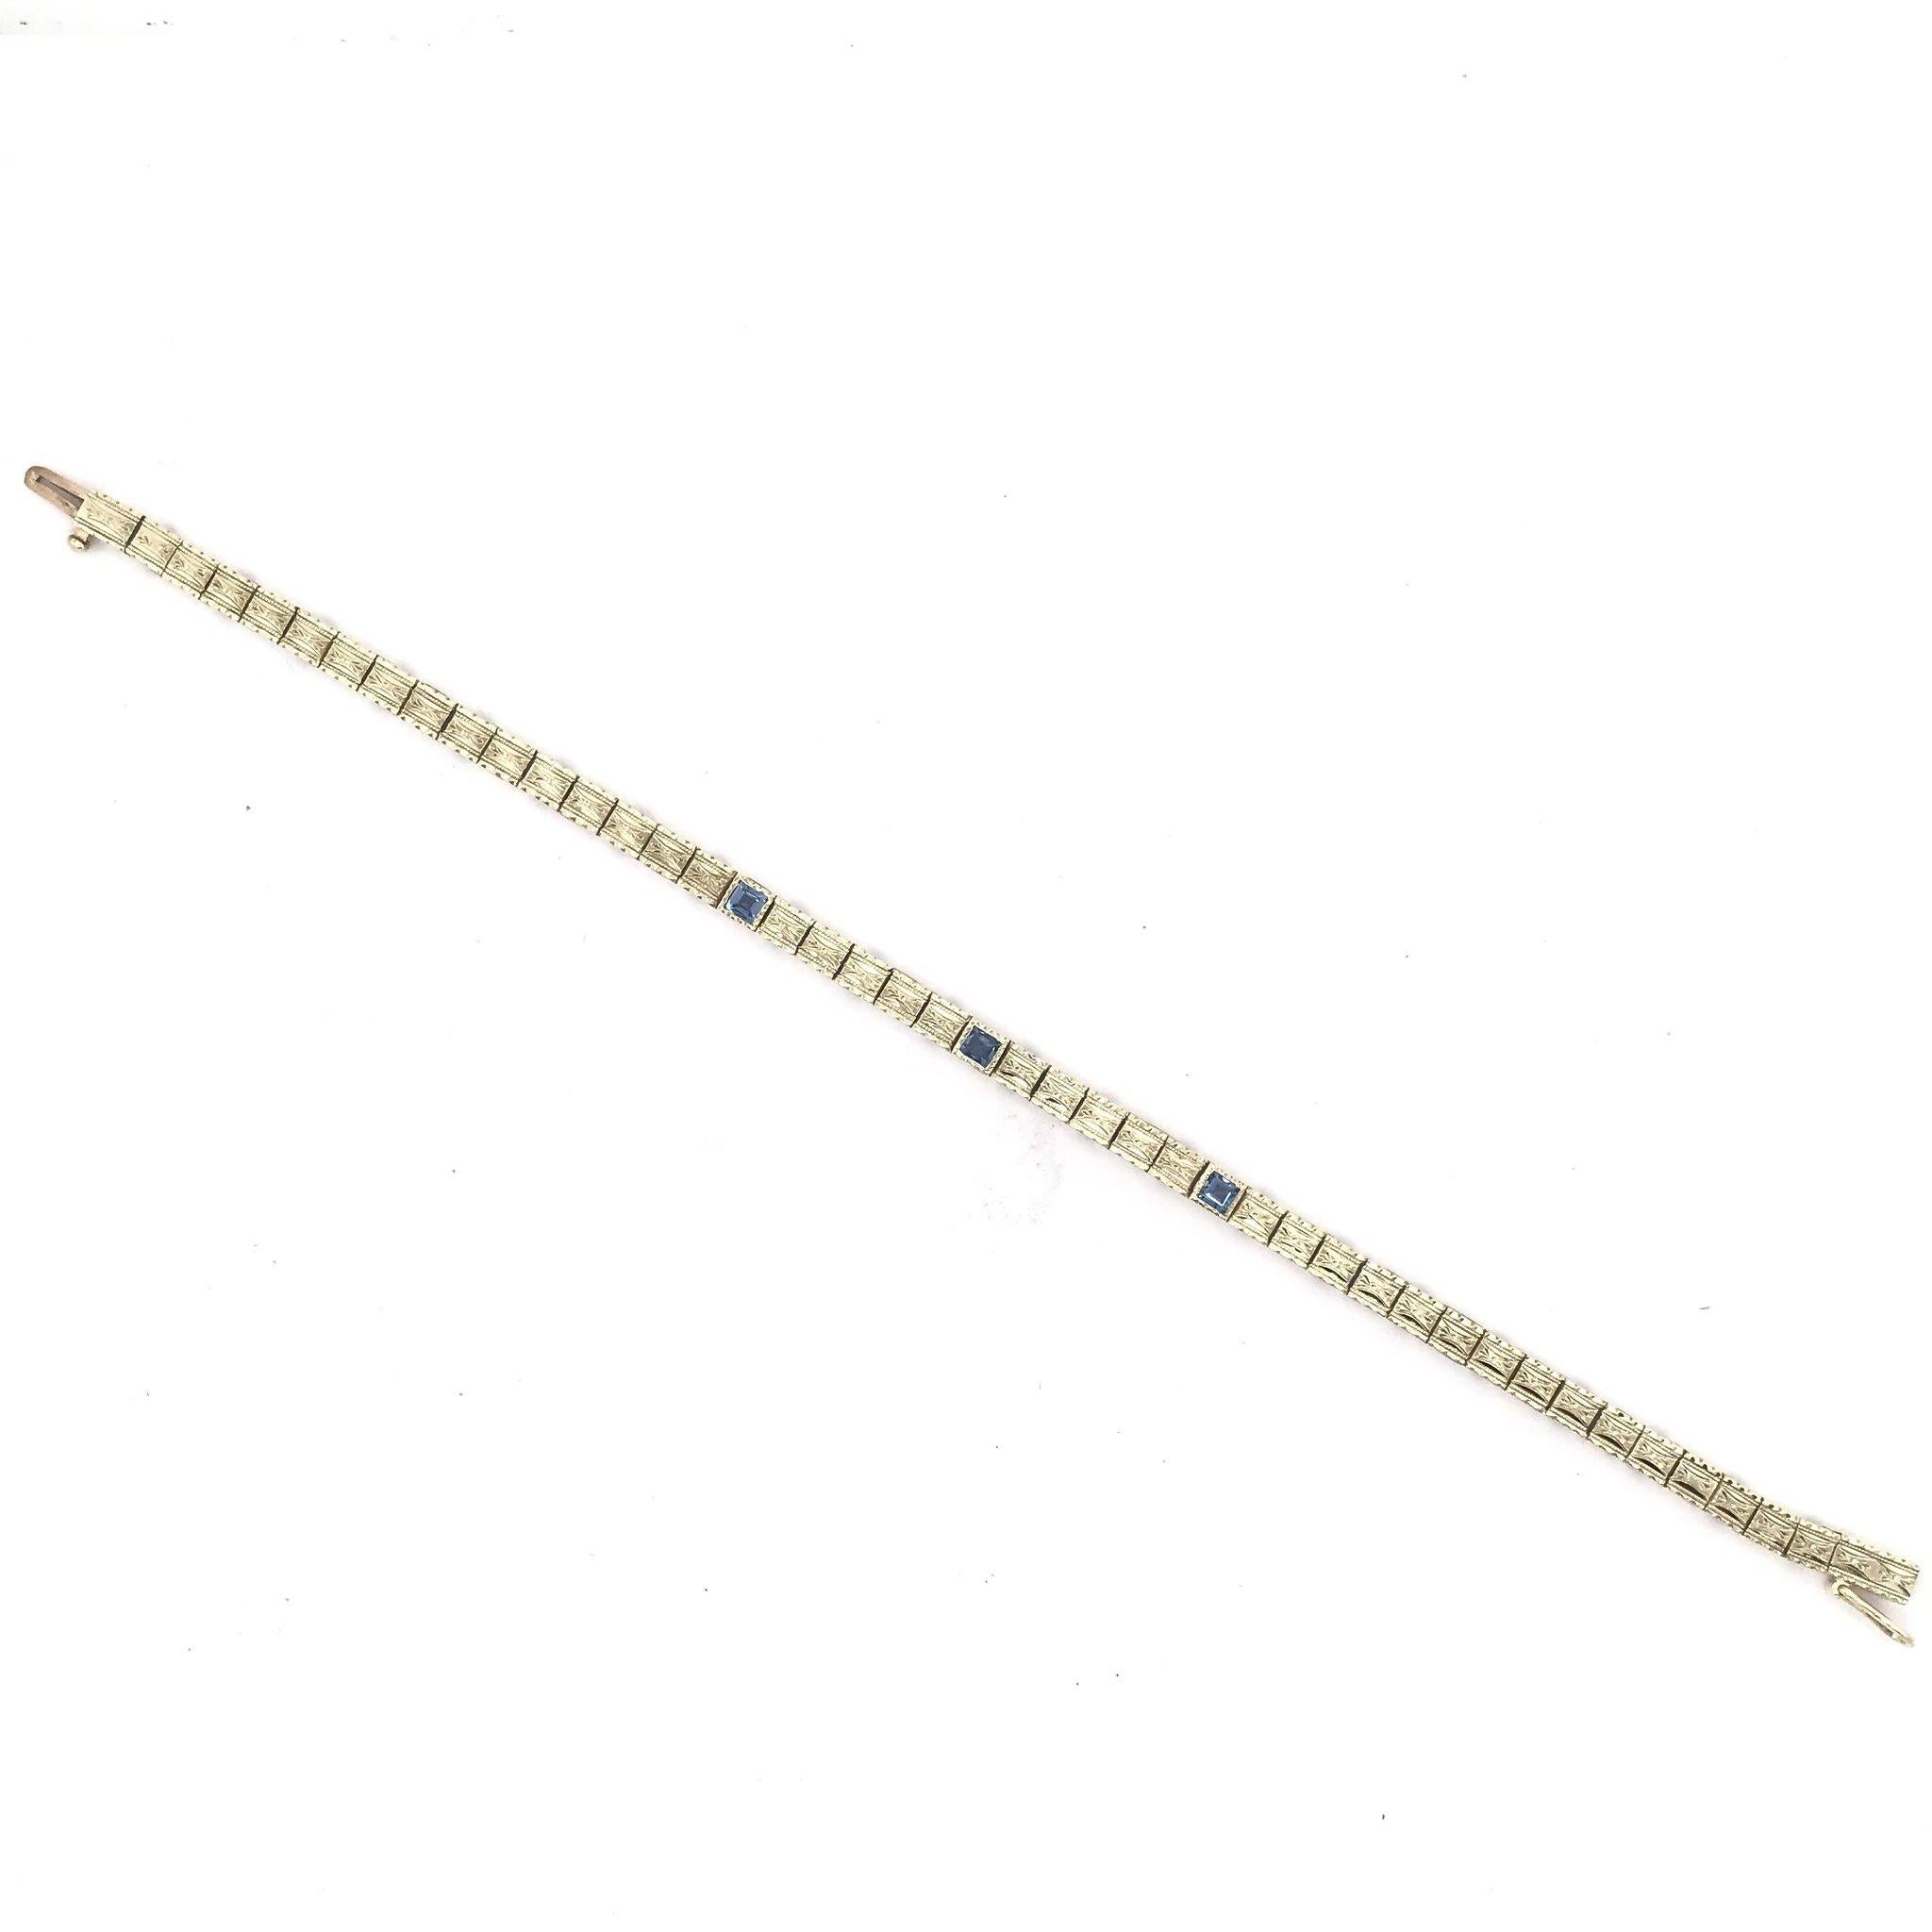 This antique piece was handcrafted sometime during the early twentieth century. Yellow gold jewelry pieces during this time were a bit scarce due to the popularity of new white metals, making this beautiful yellow gold bracelet all the more special.